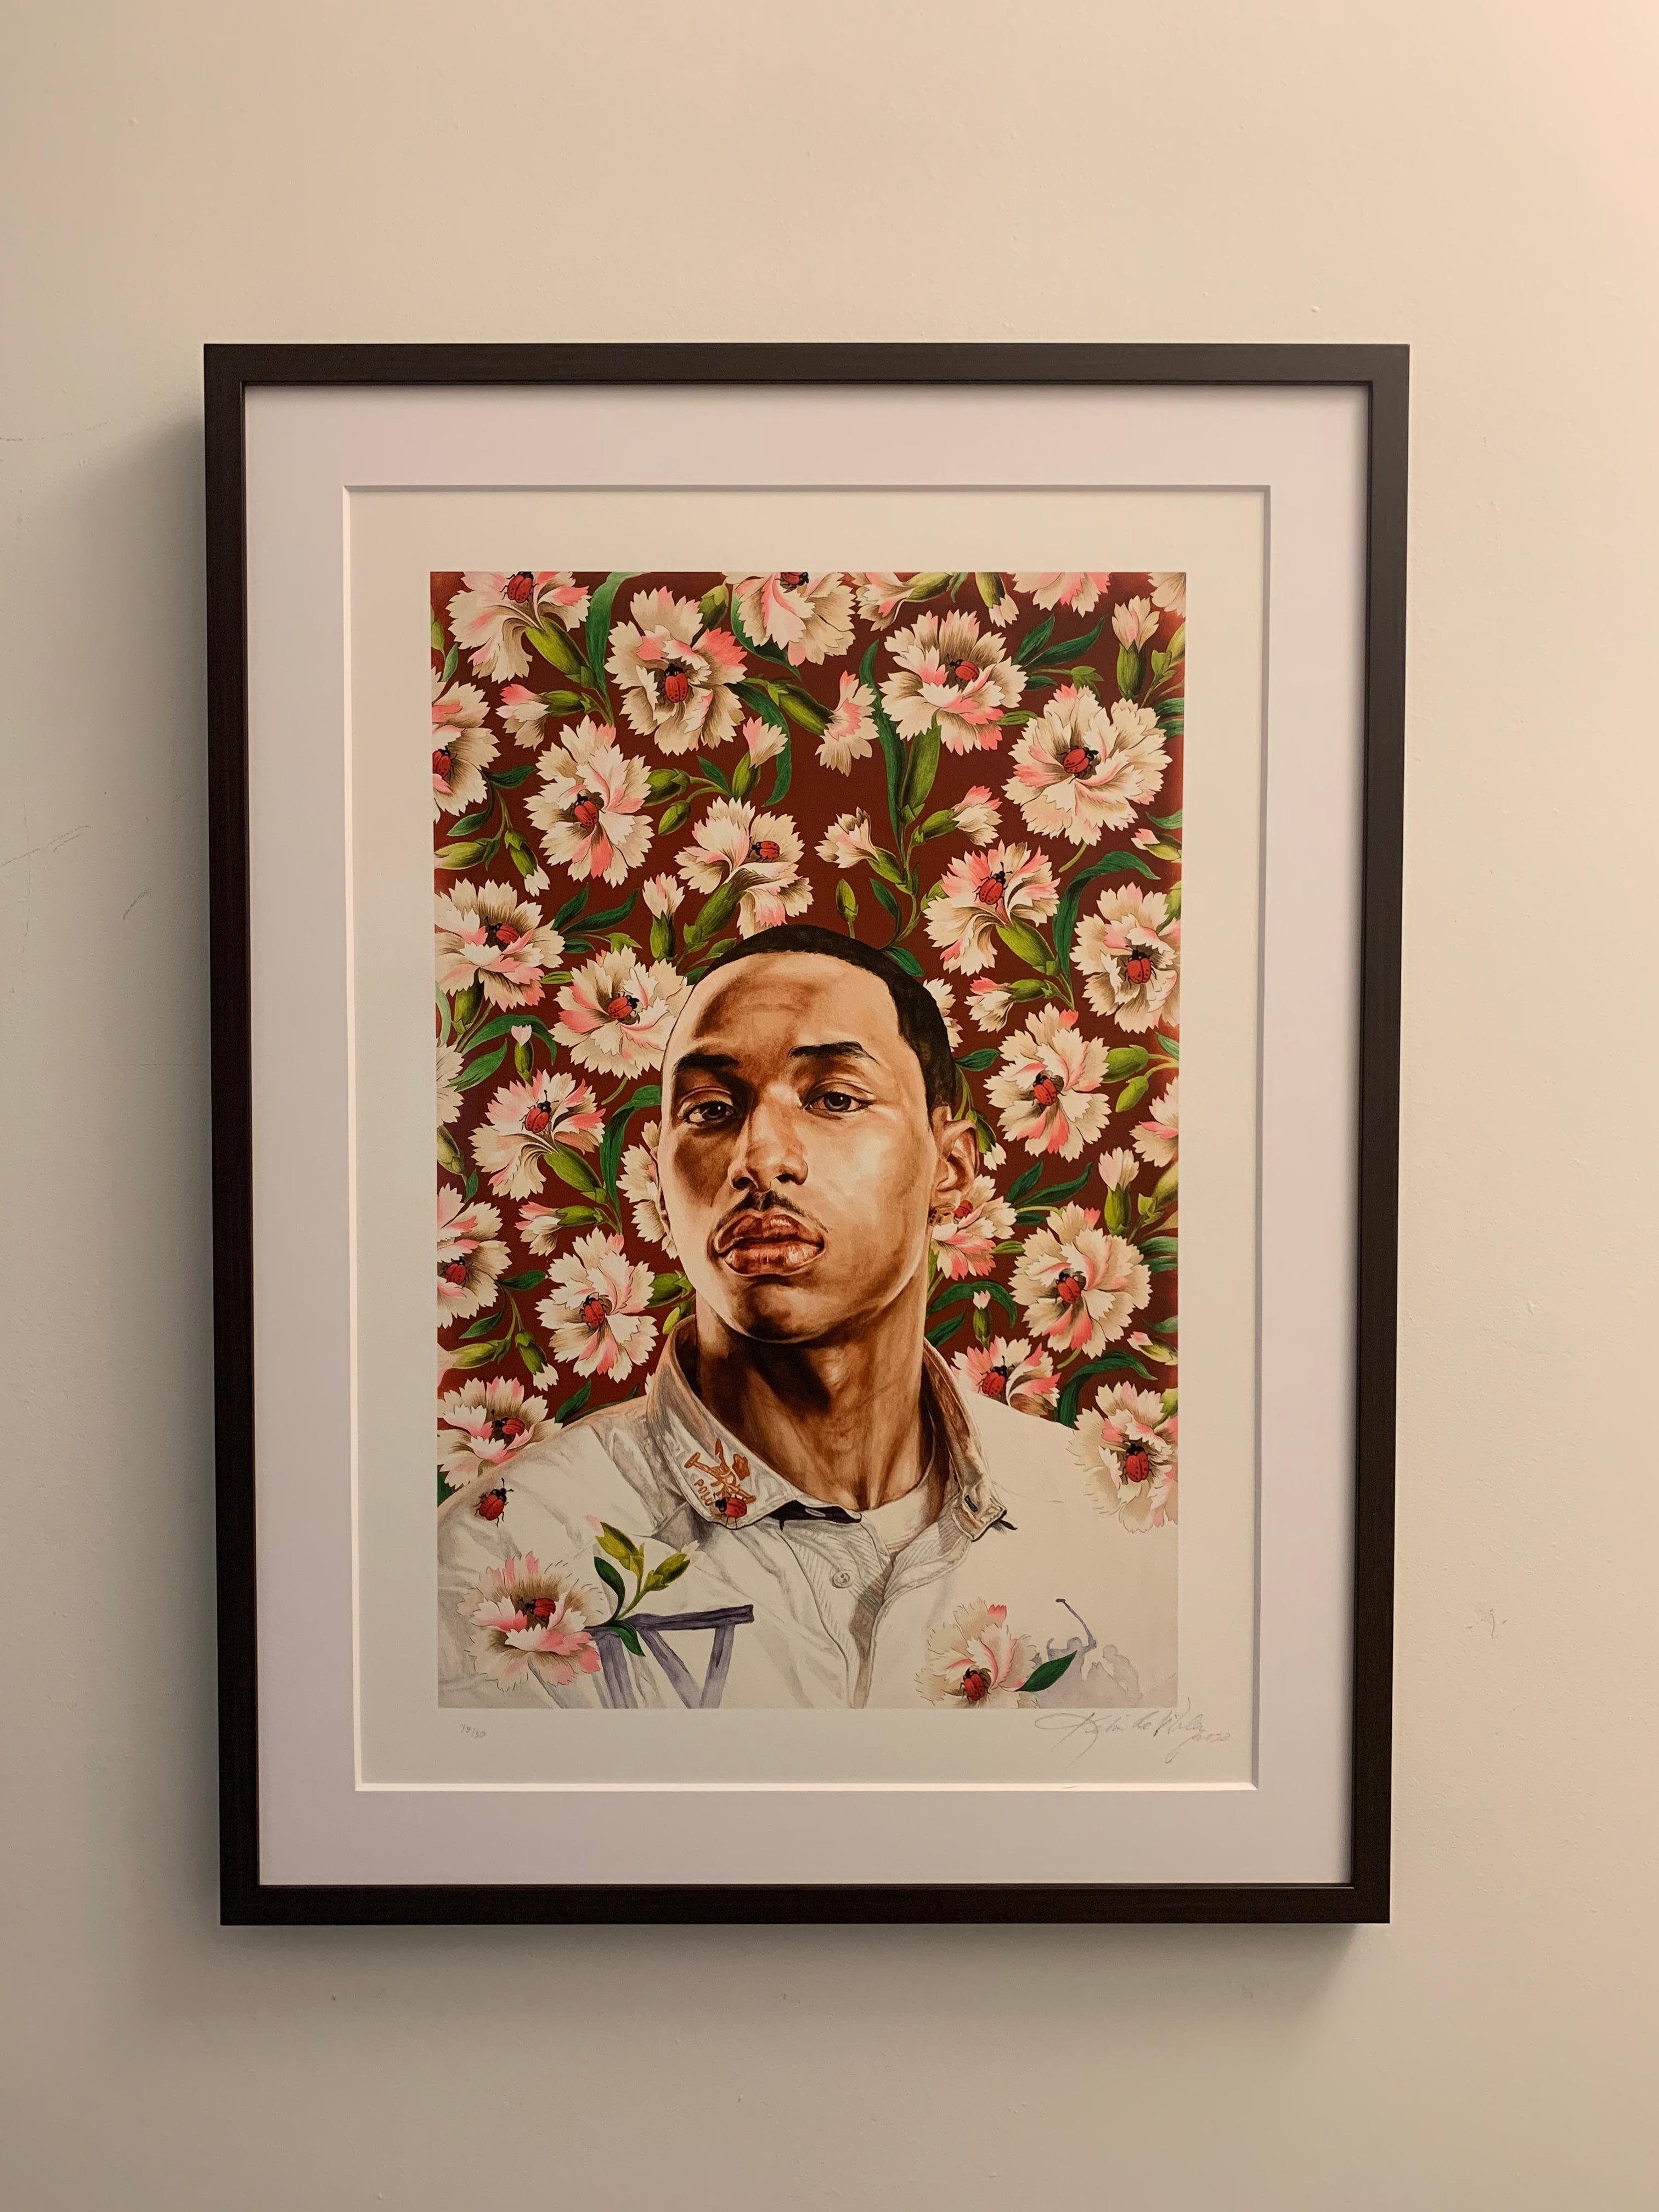 Kehinde Wiley 'Sharrod Hosten Study III' Signed Archival Pigment Print 2020 For Sale 1